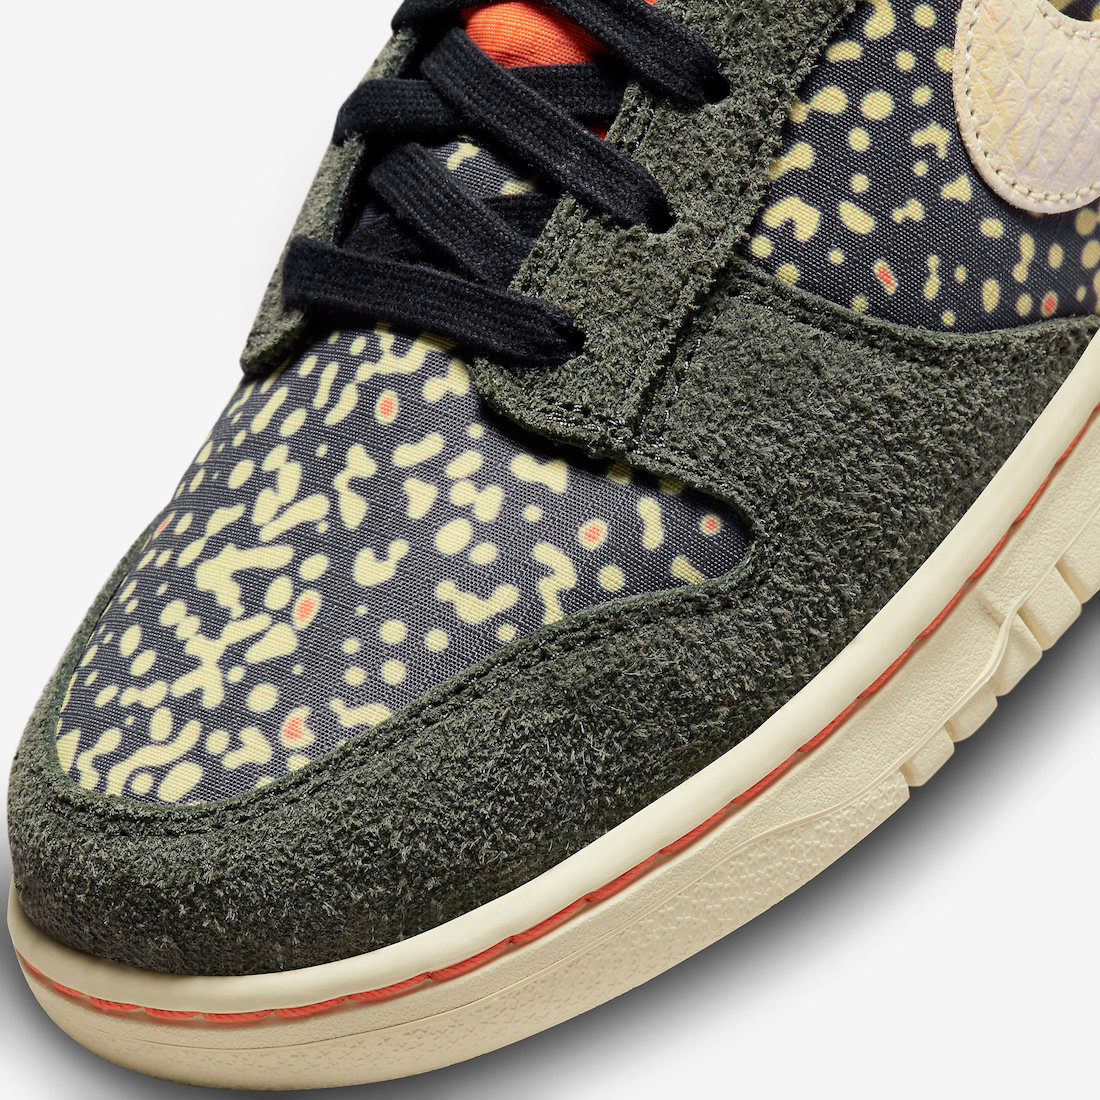 Nike-Dunk-Low-Rainbow-Trout-Release-Date-7